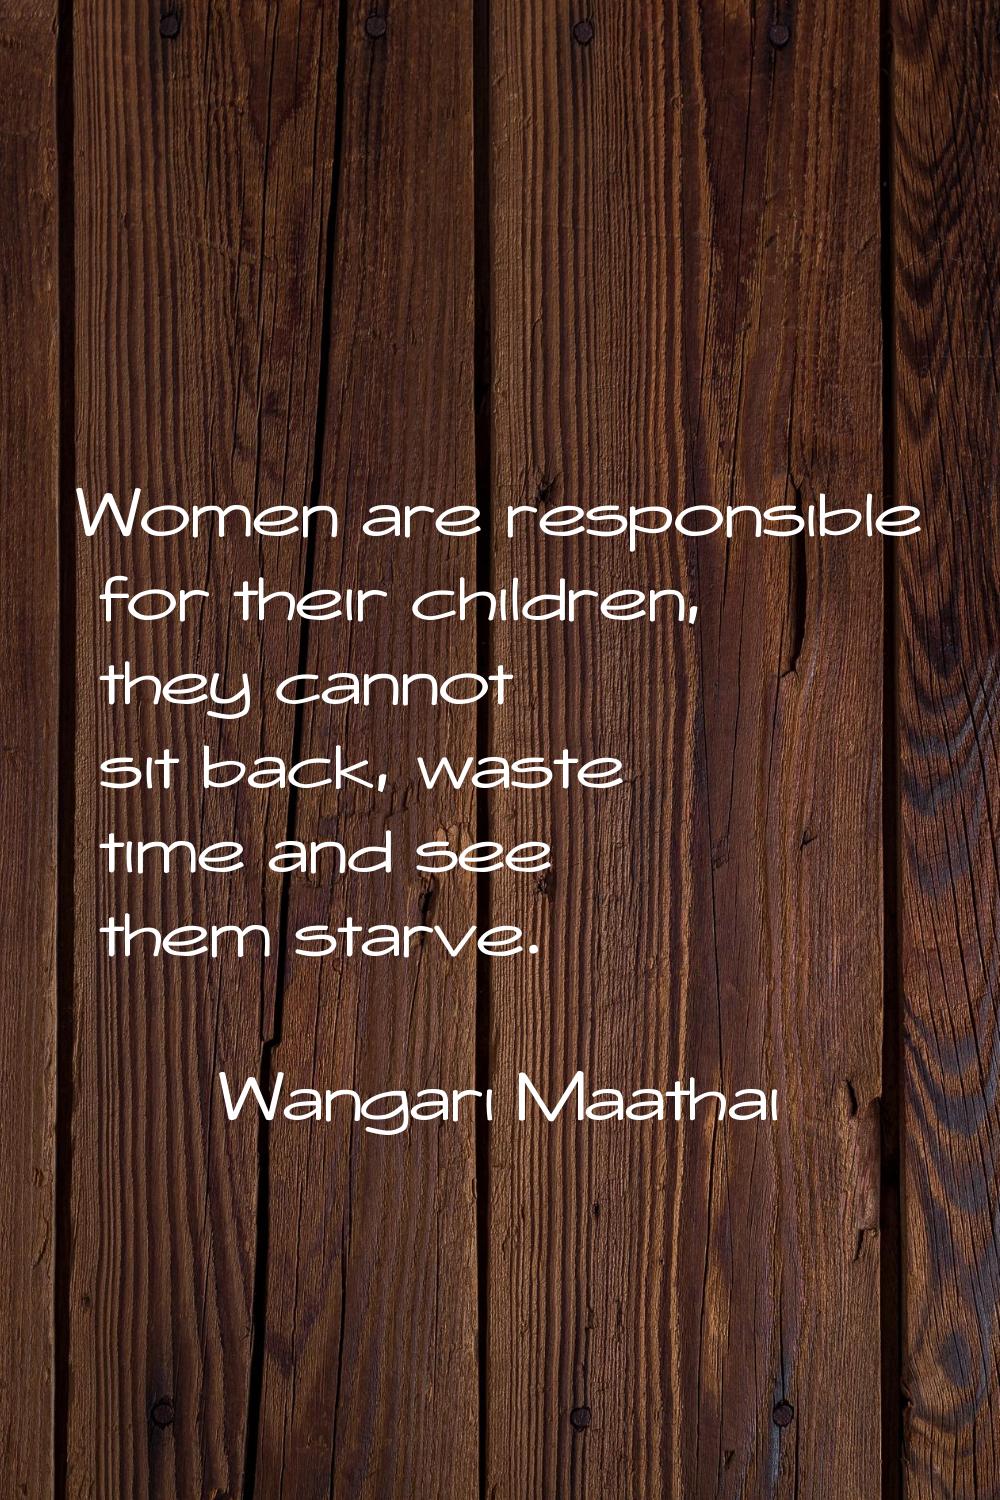 Women are responsible for their children, they cannot sit back, waste time and see them starve.